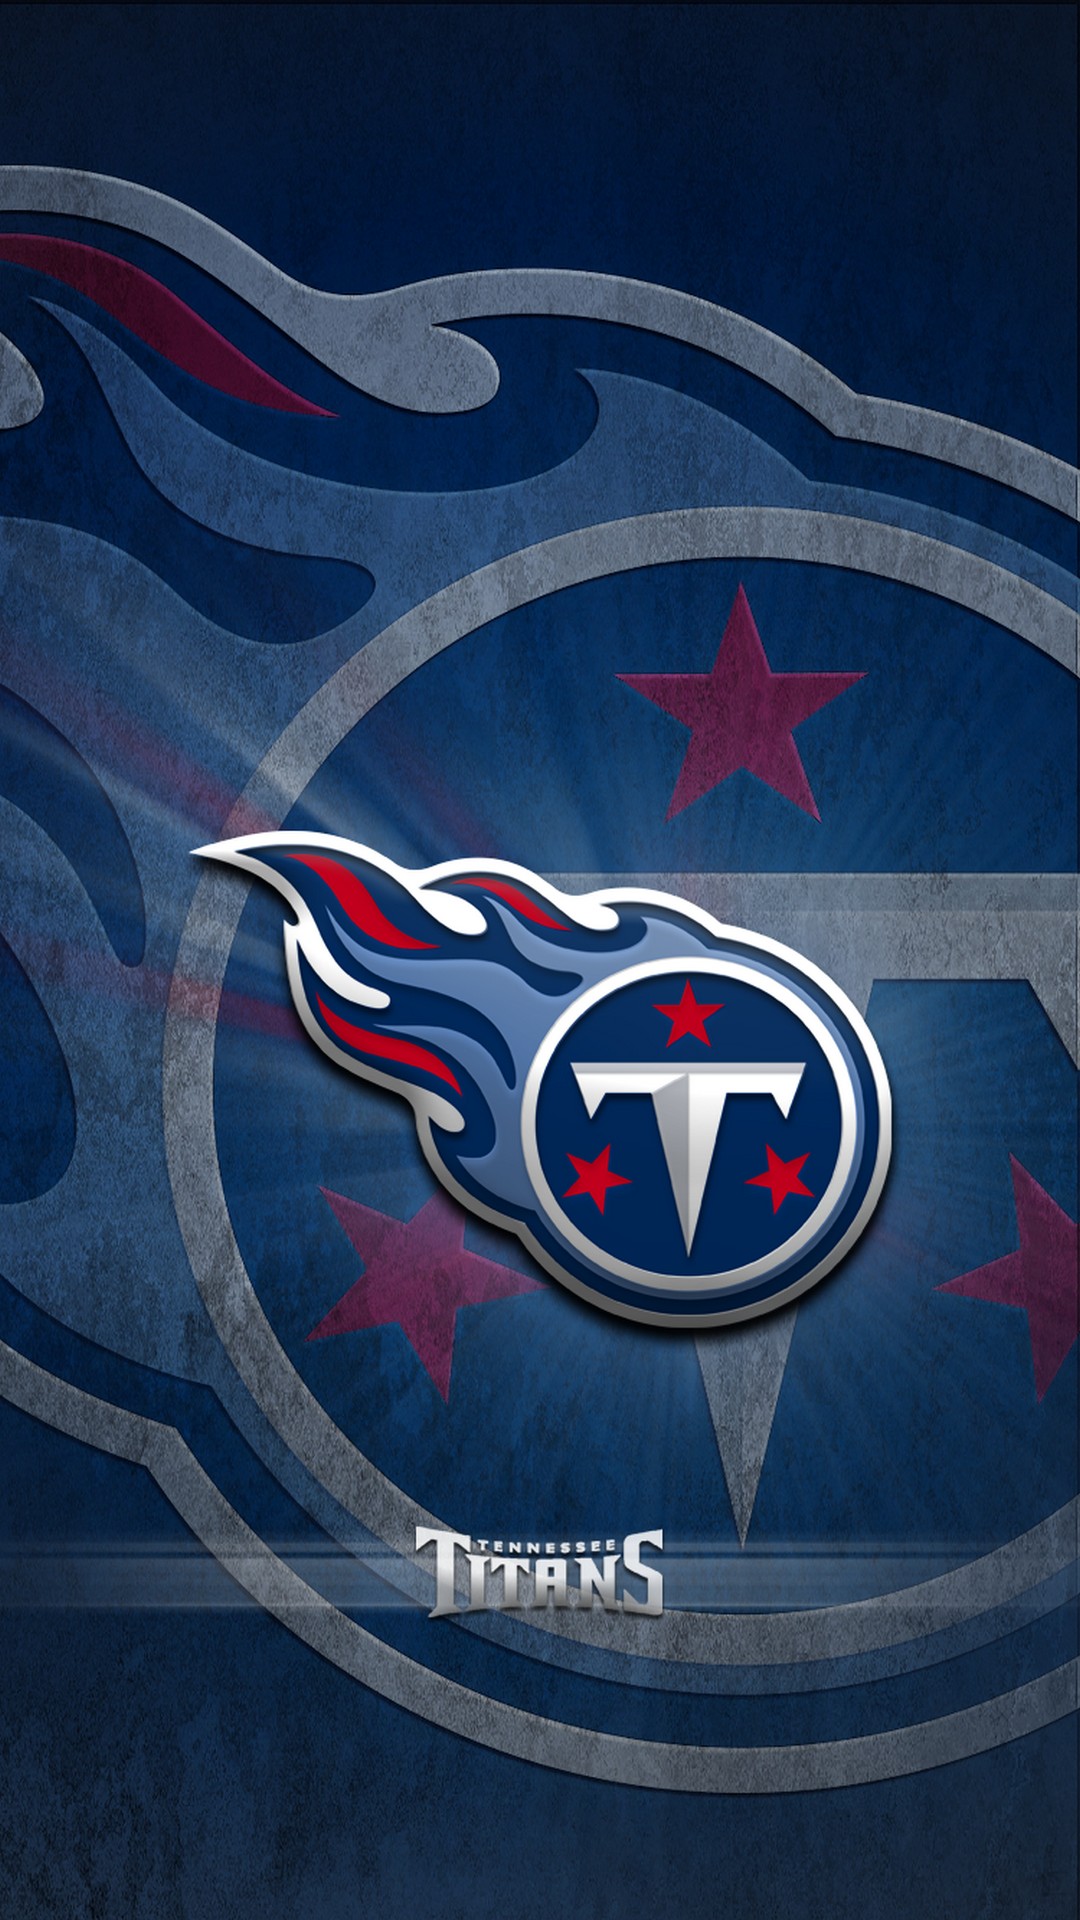 Tennessee Titans iPhone Wallpaper High Quality with high-resolution 1080x1920 pixel. Donwload and set as wallpaper for your iPhone X, iPhone XS home screen backgrounds, XS Max, XR, iPhone8 lock screen wallpaper, iPhone 7, 6, SE and other mobile devices